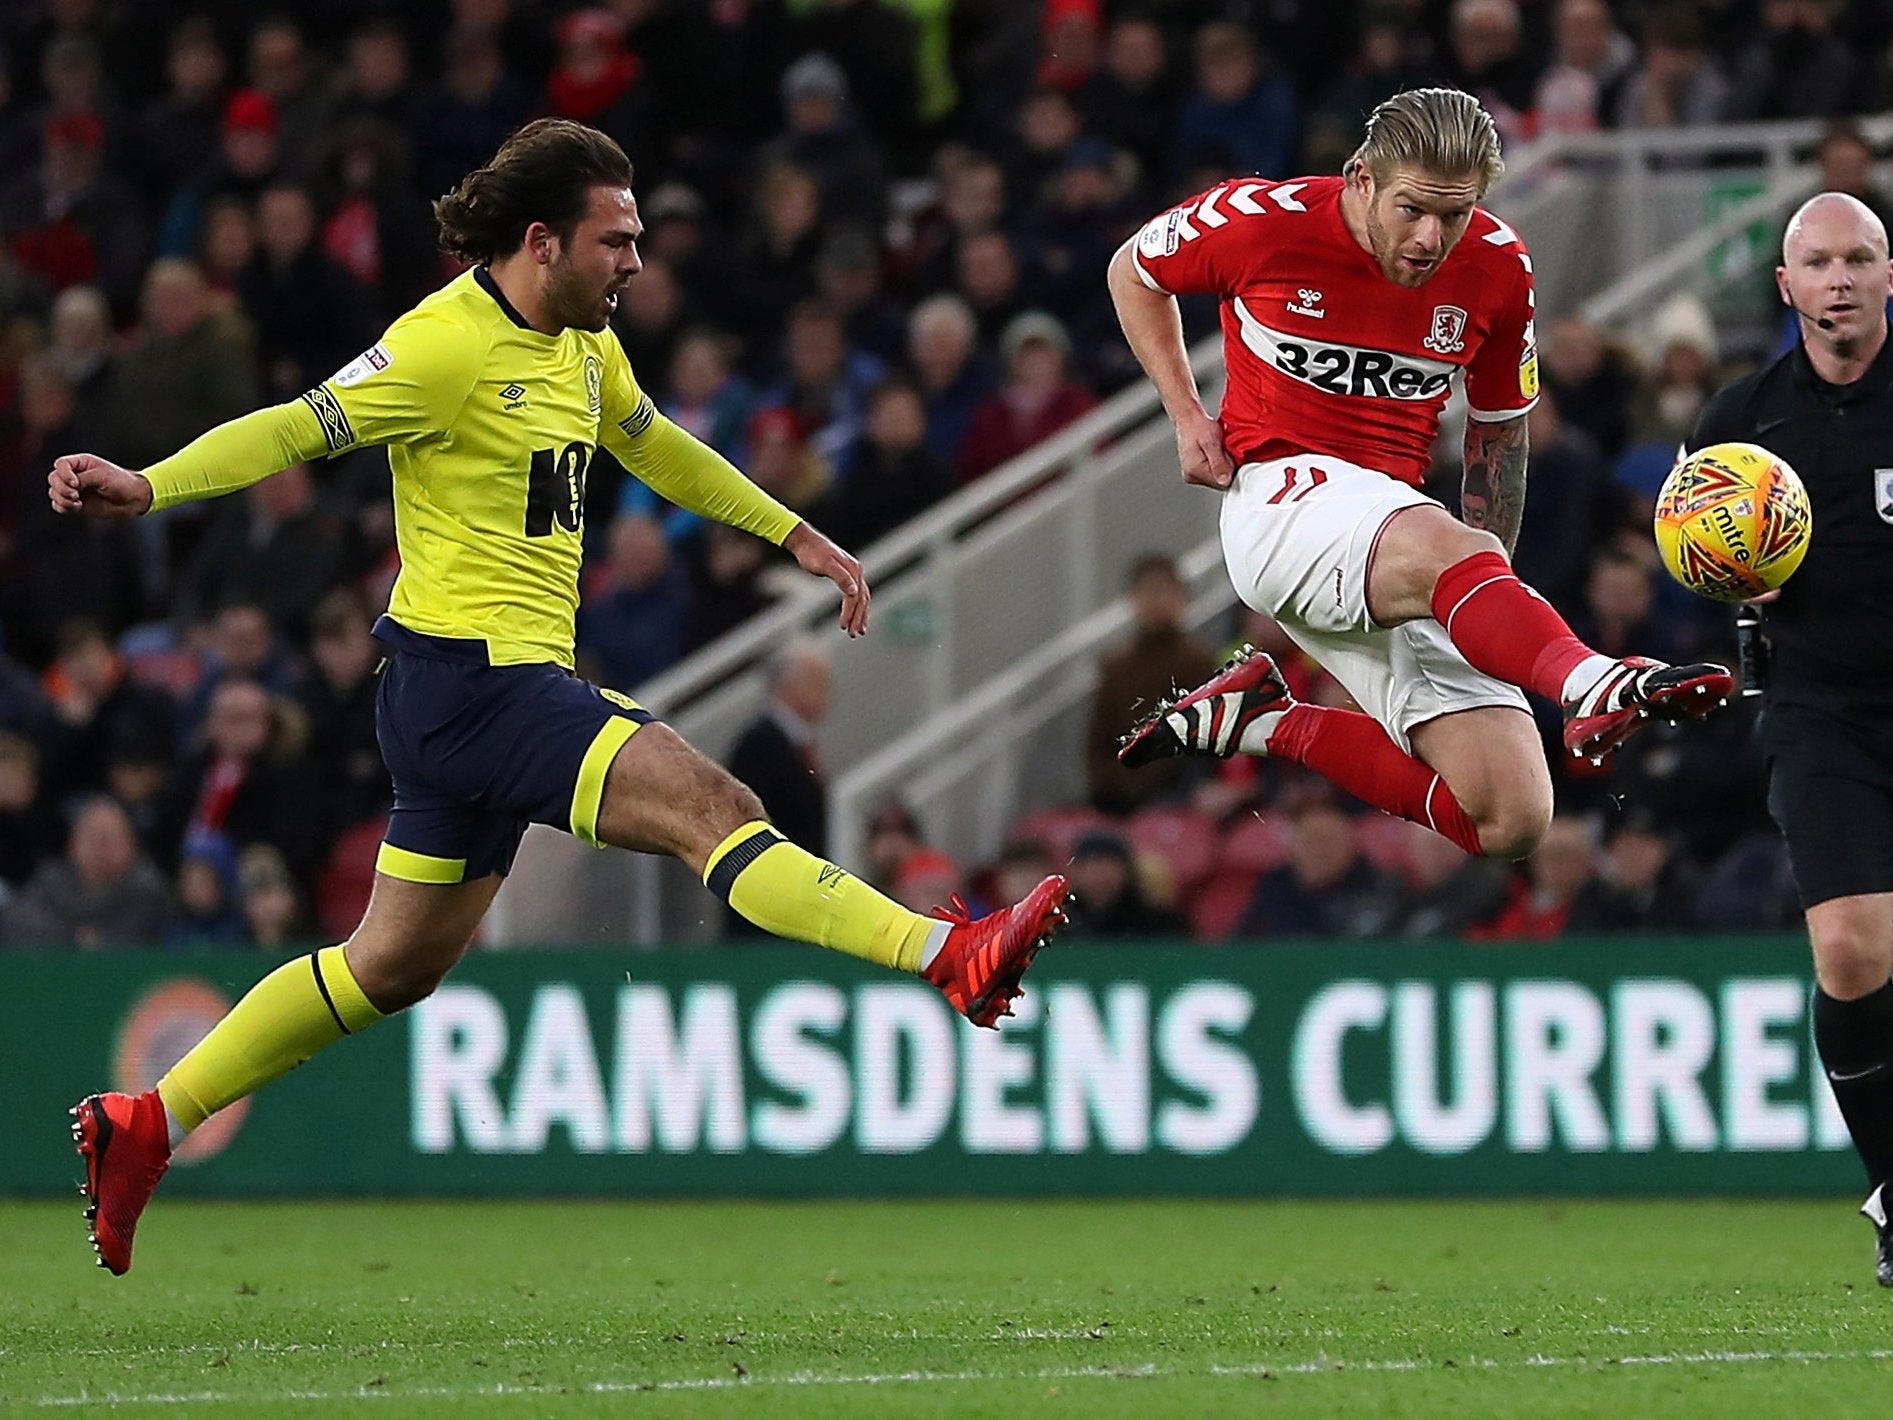 Adam Clayton is the Middlesbrough captain